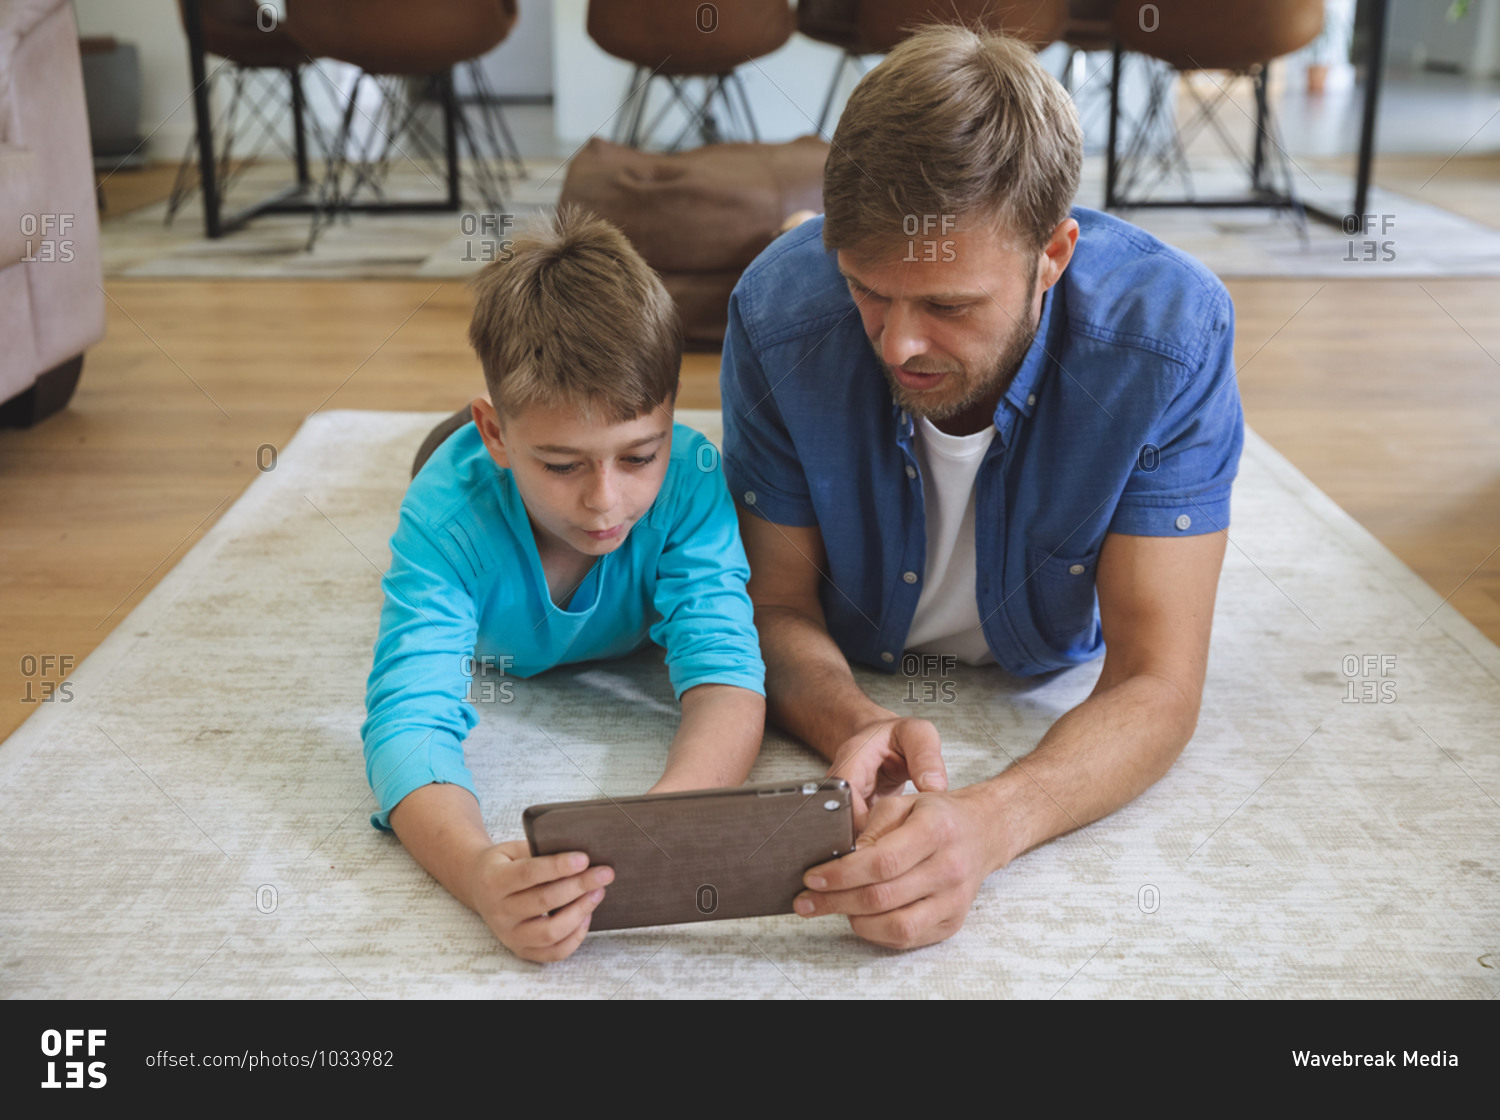 Caucasian man at home with his son together, lying on rug in living room, using digital tablet. Social distancing during Covid 19 Coronavirus quarantine lockdown.